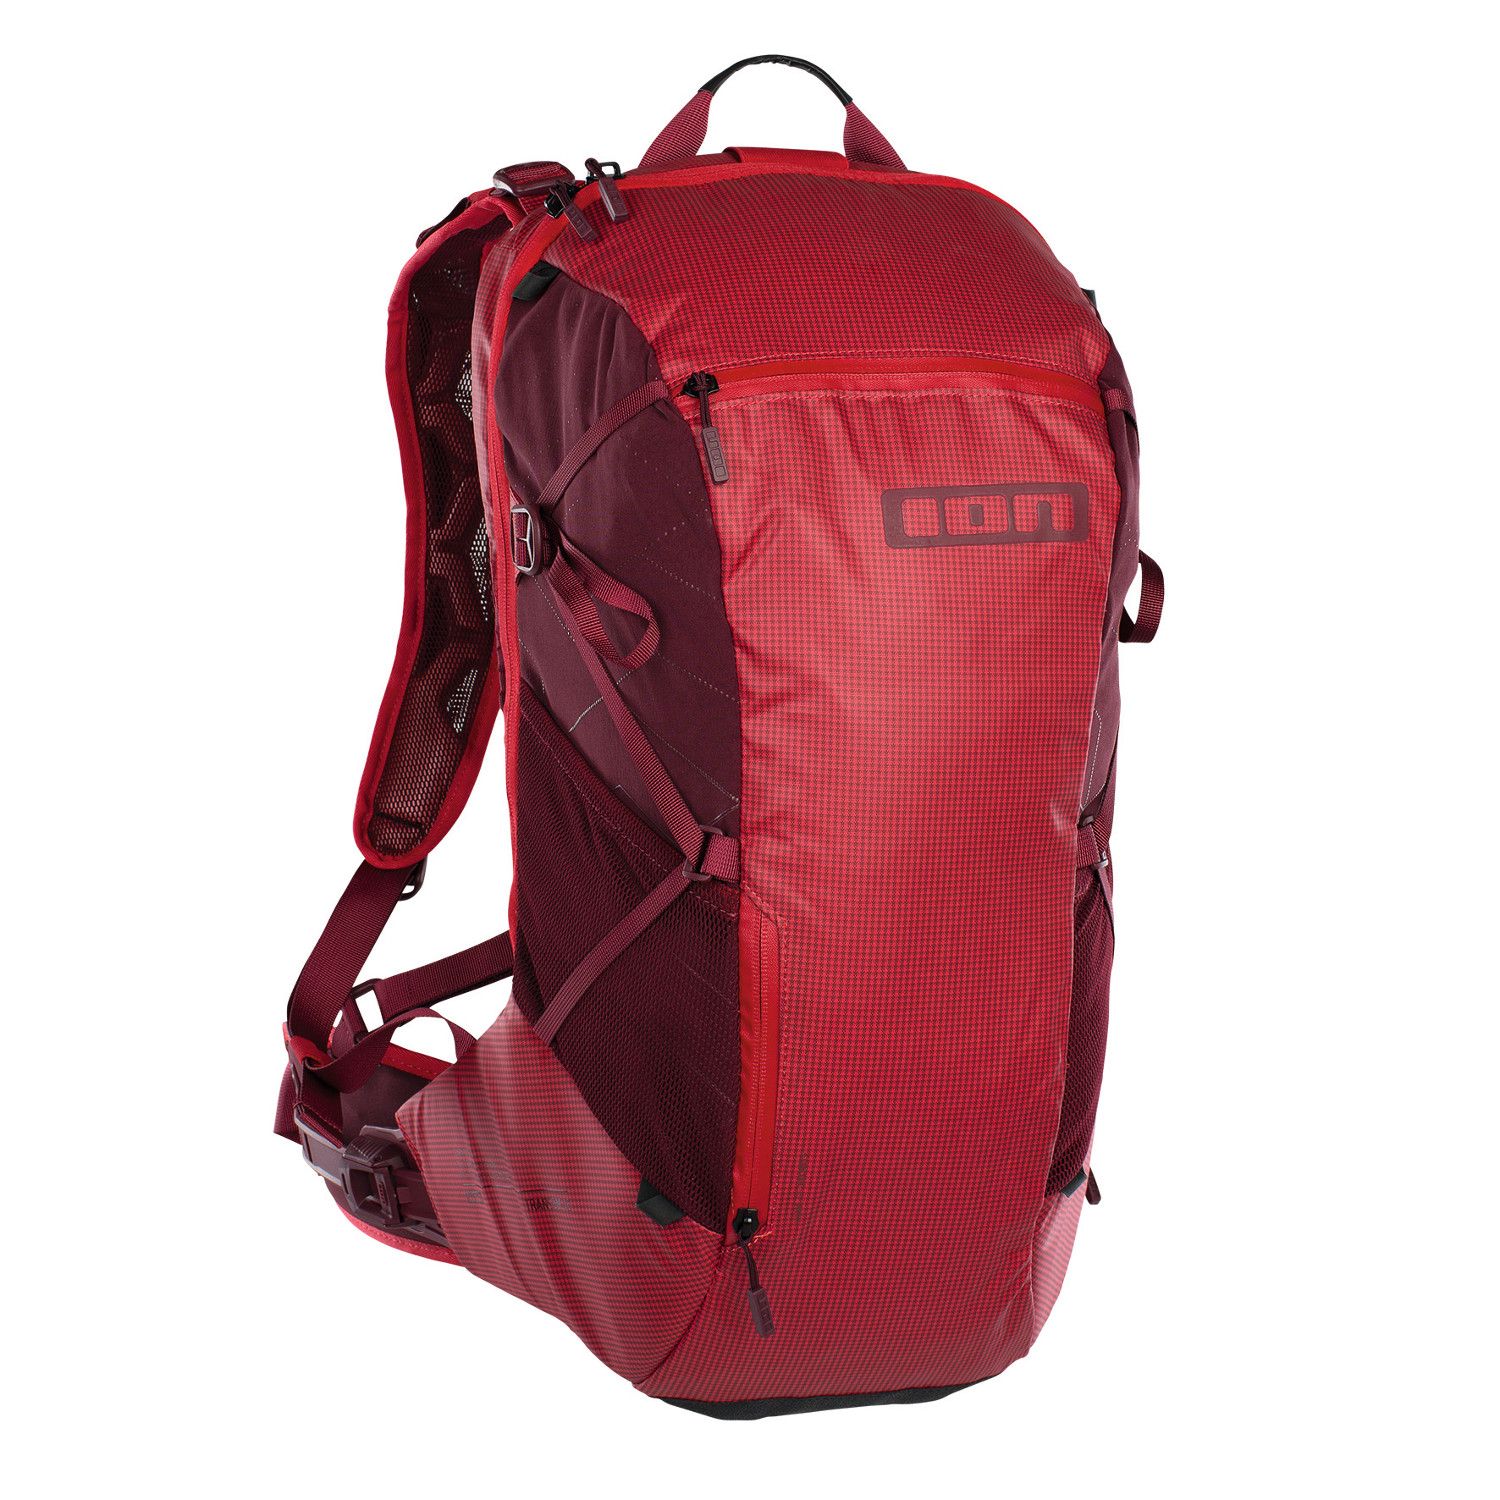 ION ackpack with Hydration System Compartment Transom 16 Blazing Red 16 L